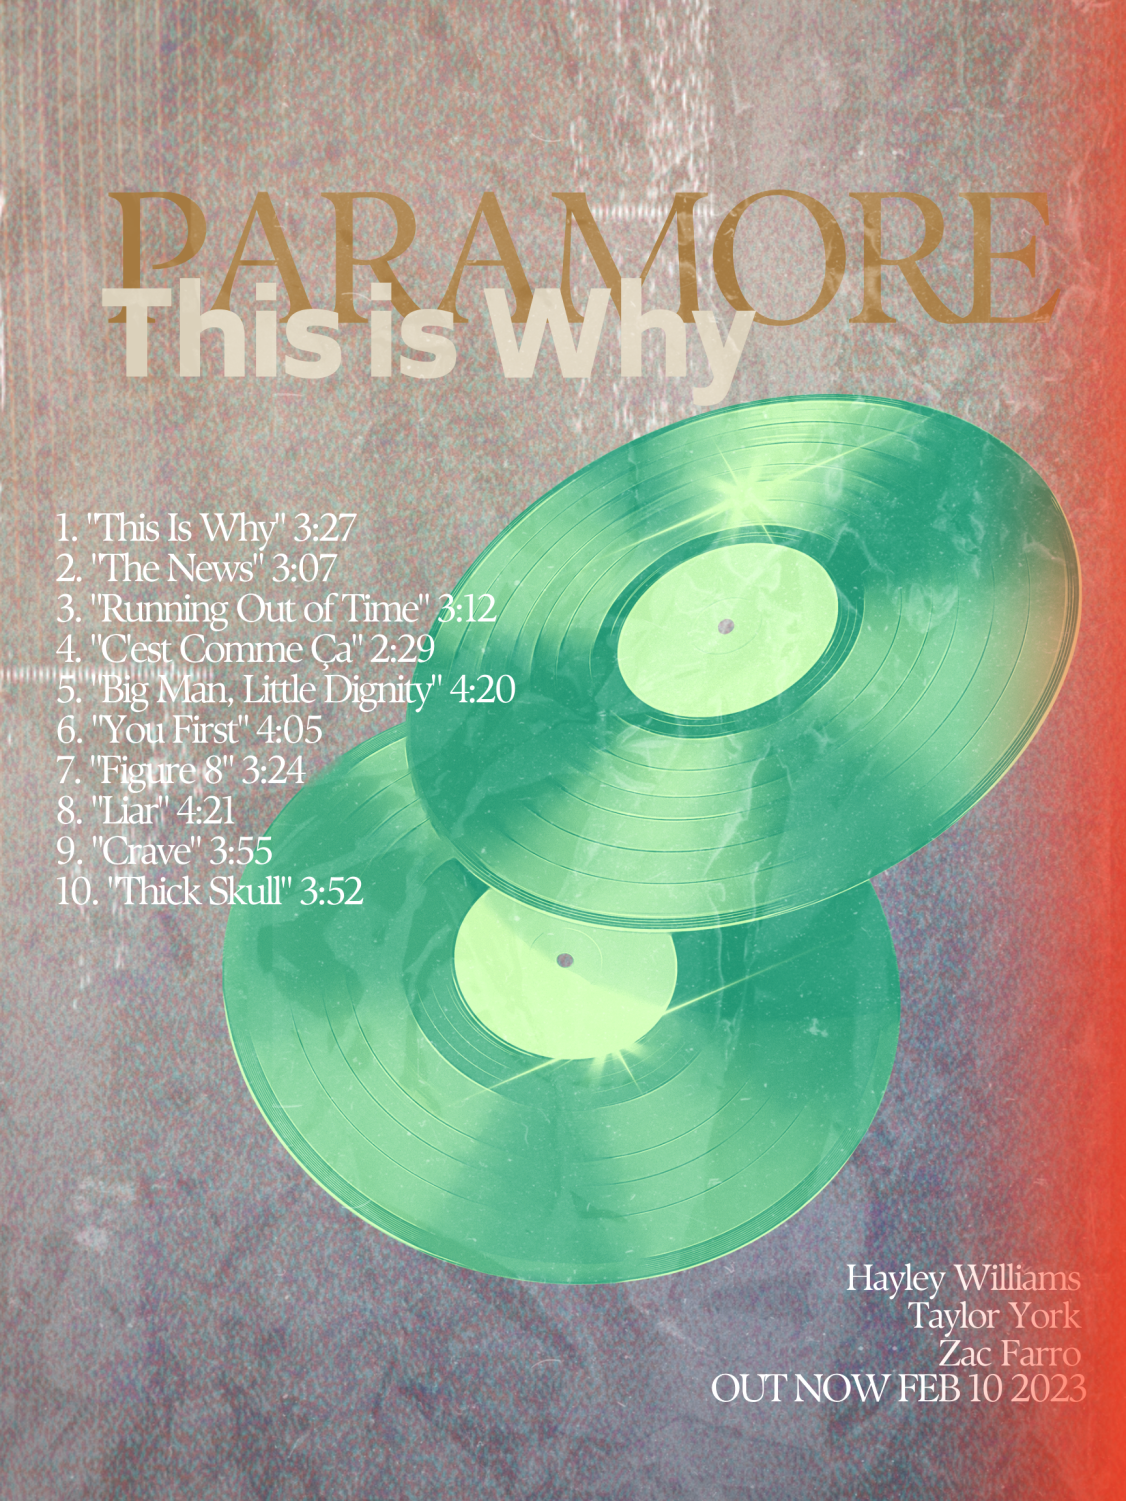 Paramore Greatest Hits 2020 Full album - The Best of Paramore